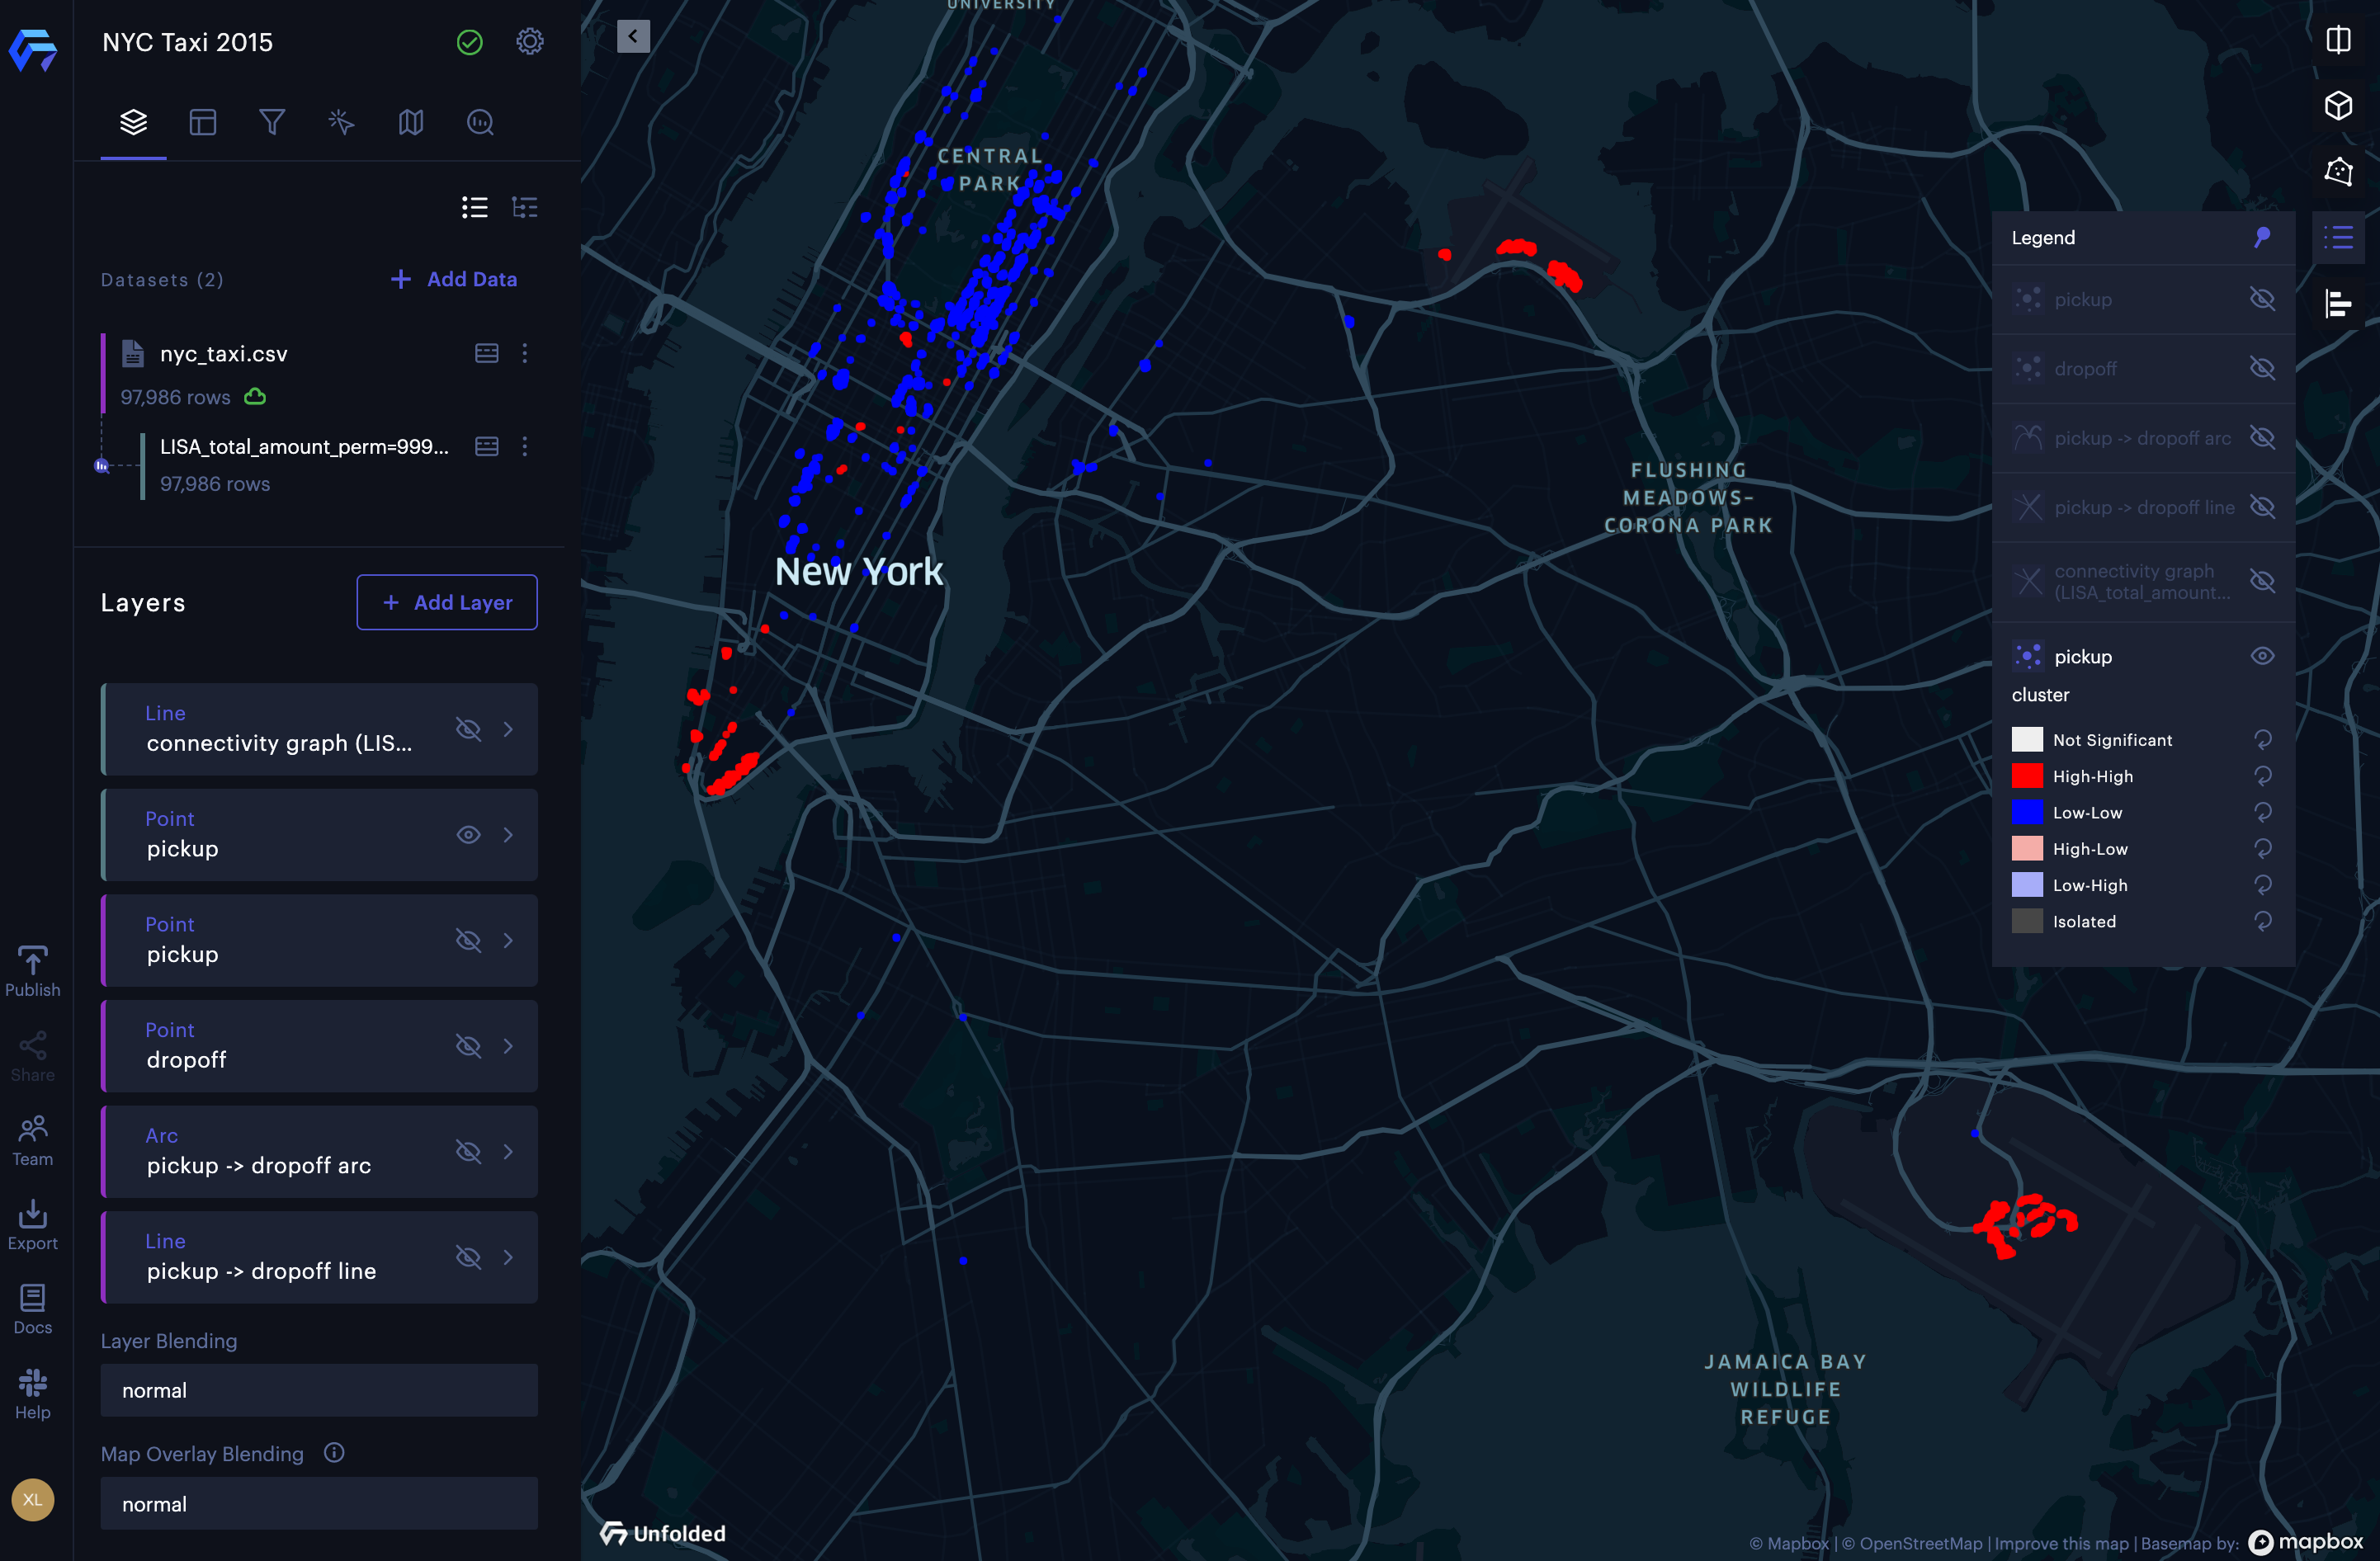 The result of cluster and outlier analysis of taxi fees (total amount) in New York.